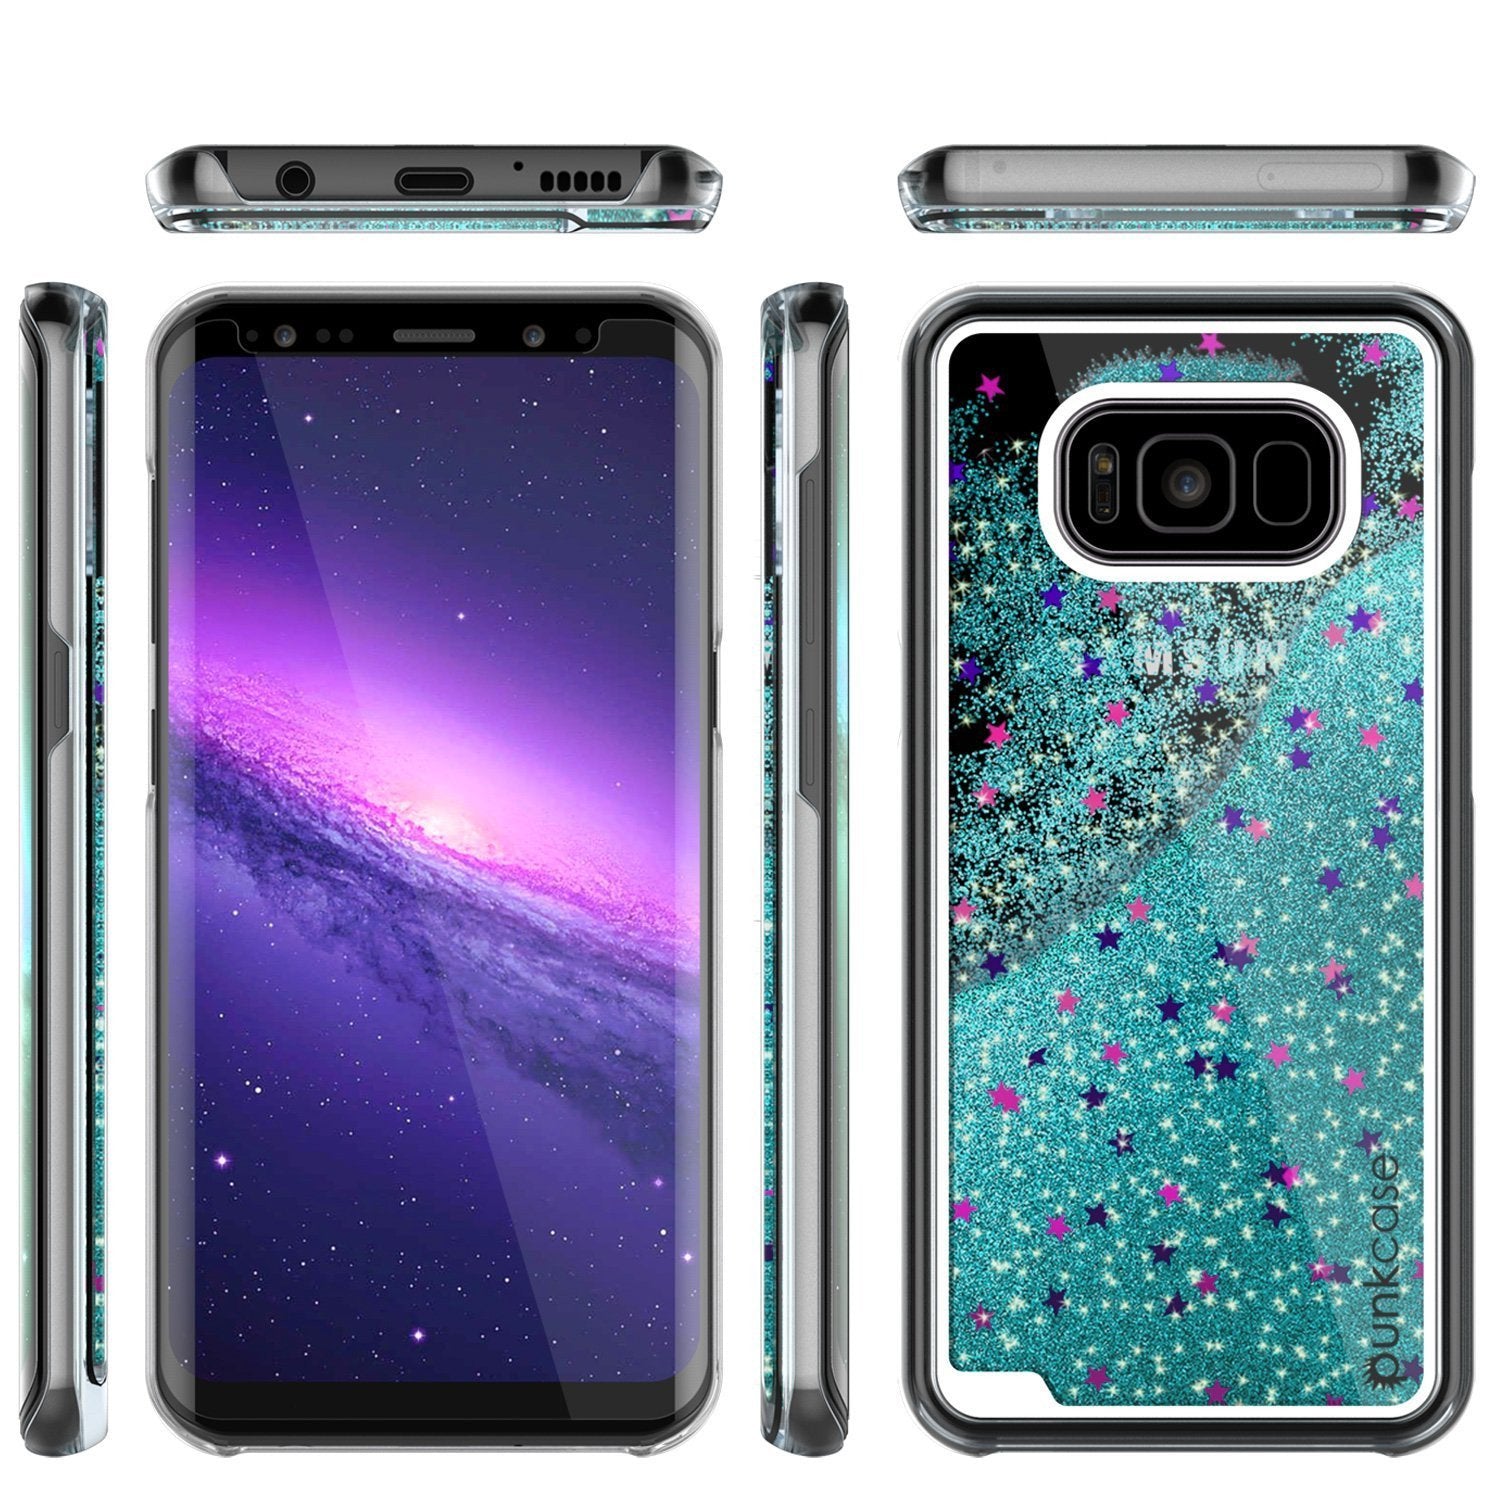 S8 Plus Case, Punkcase Liquid Teal Series Protective Dual Layer Floating Glitter Cover